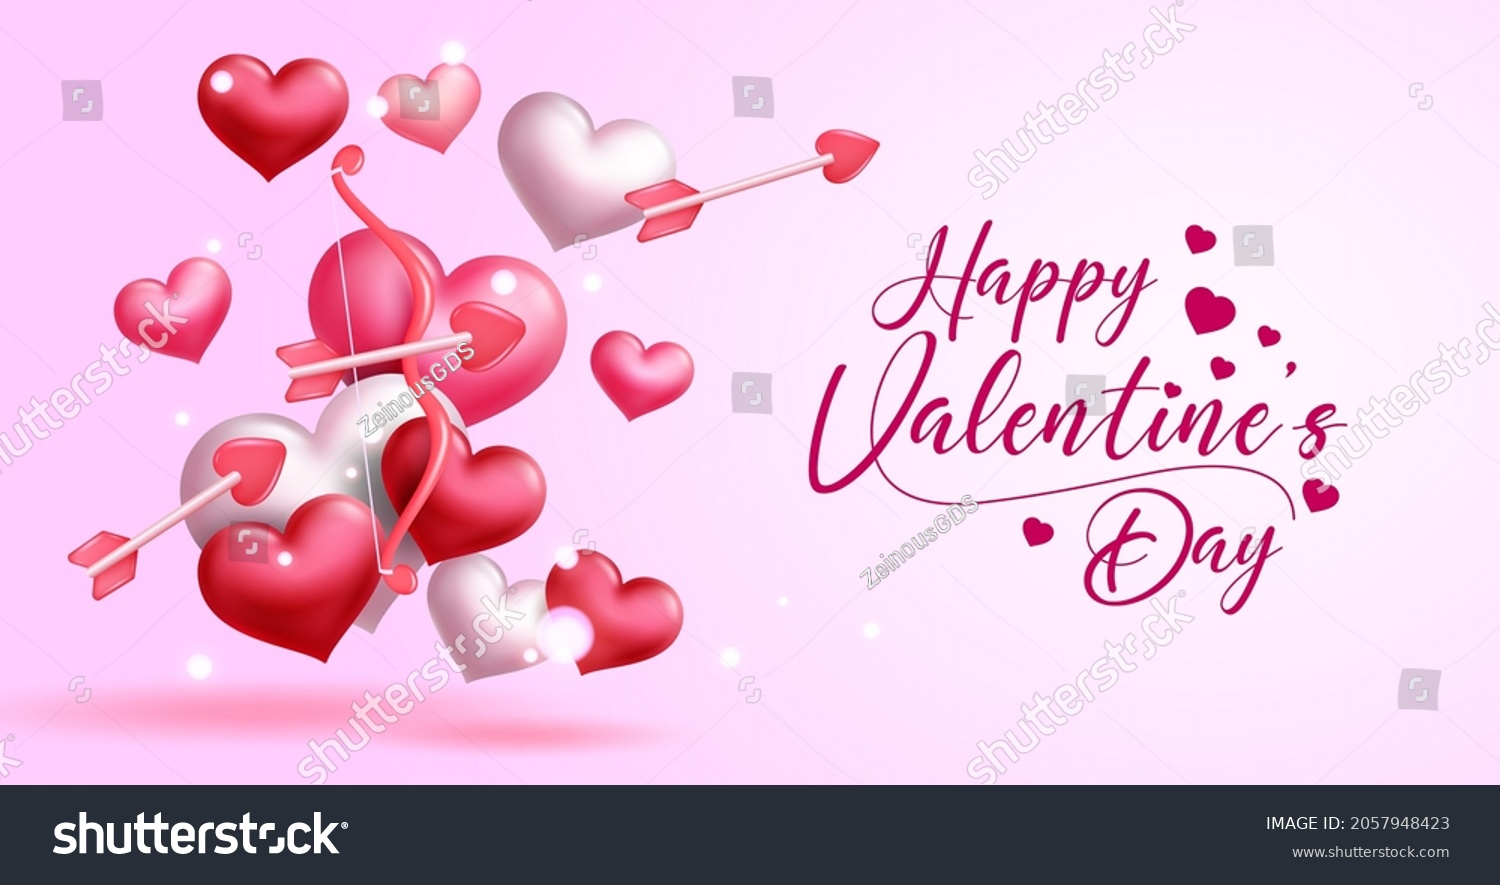 SVG of Happy valentines greeting vector design. Happy valentine's day typography text with cupid's bow and arrow element in cute hearts background for valentine decoration. Vector illustration.
 svg